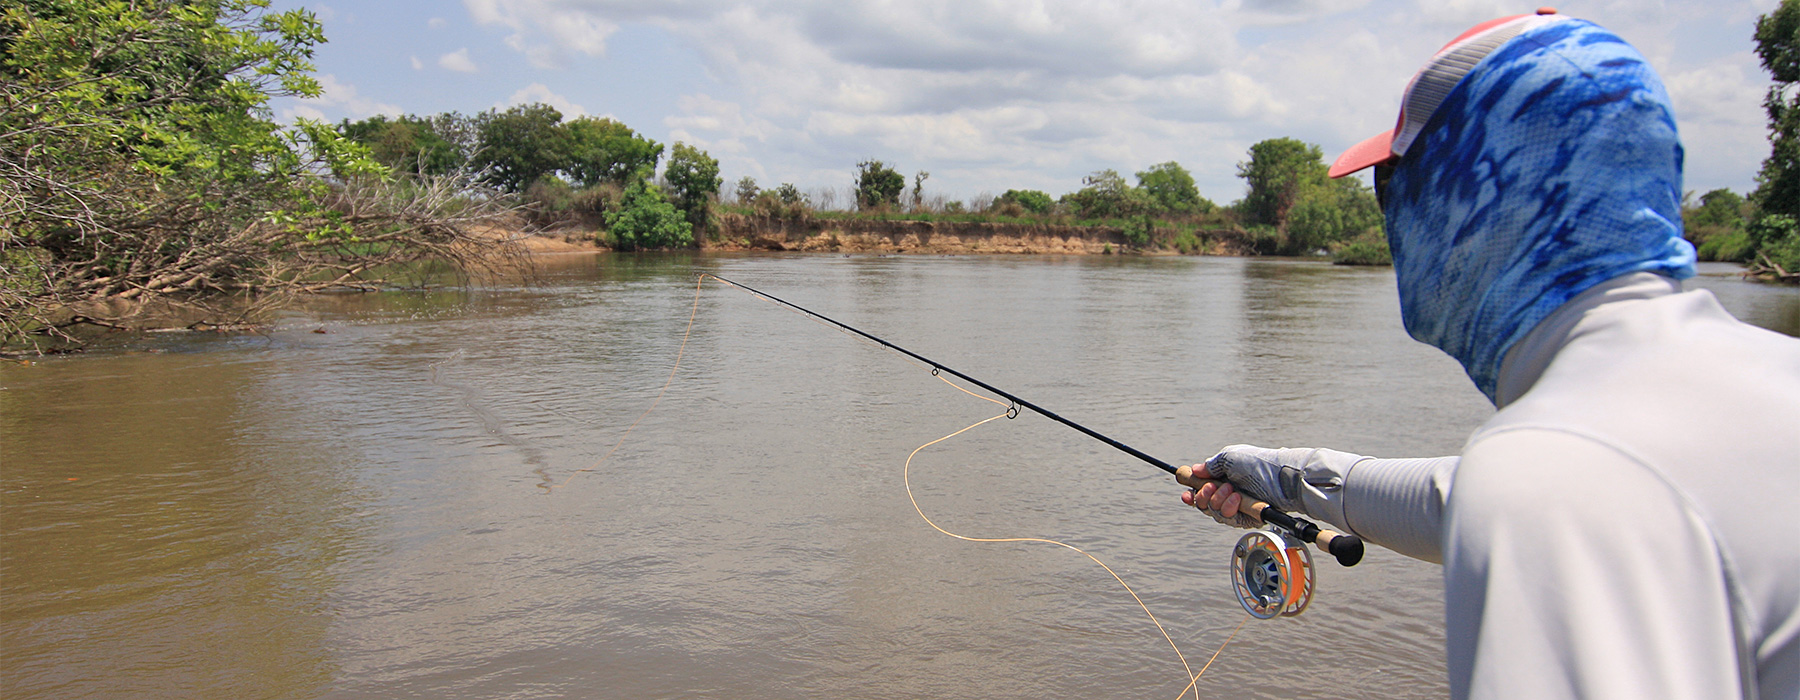 Essential Gear for Fly Fishing for Tigerfish in Africa